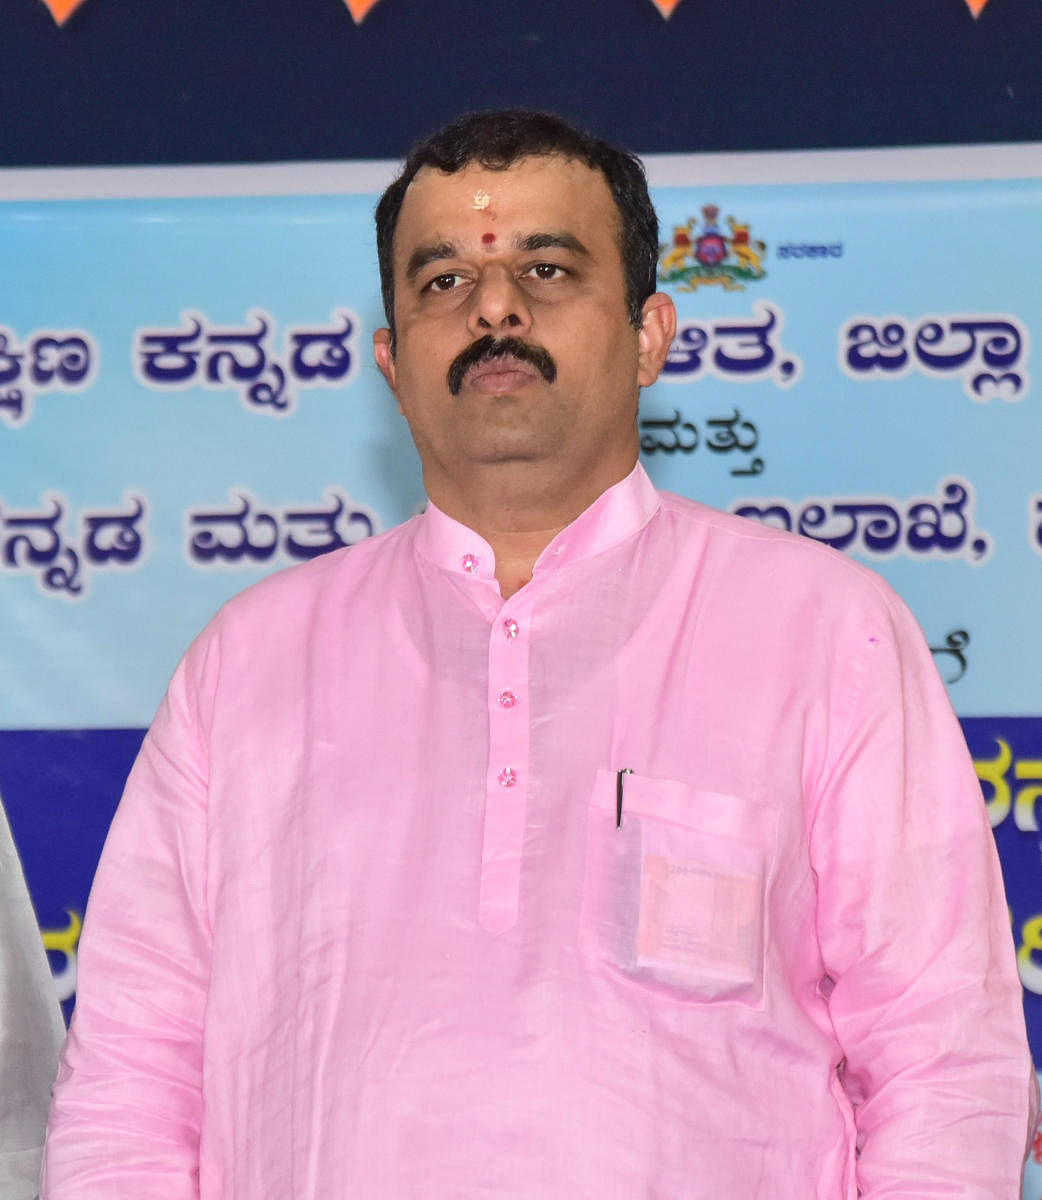 Drive to clear pending files in Karkala: Minister